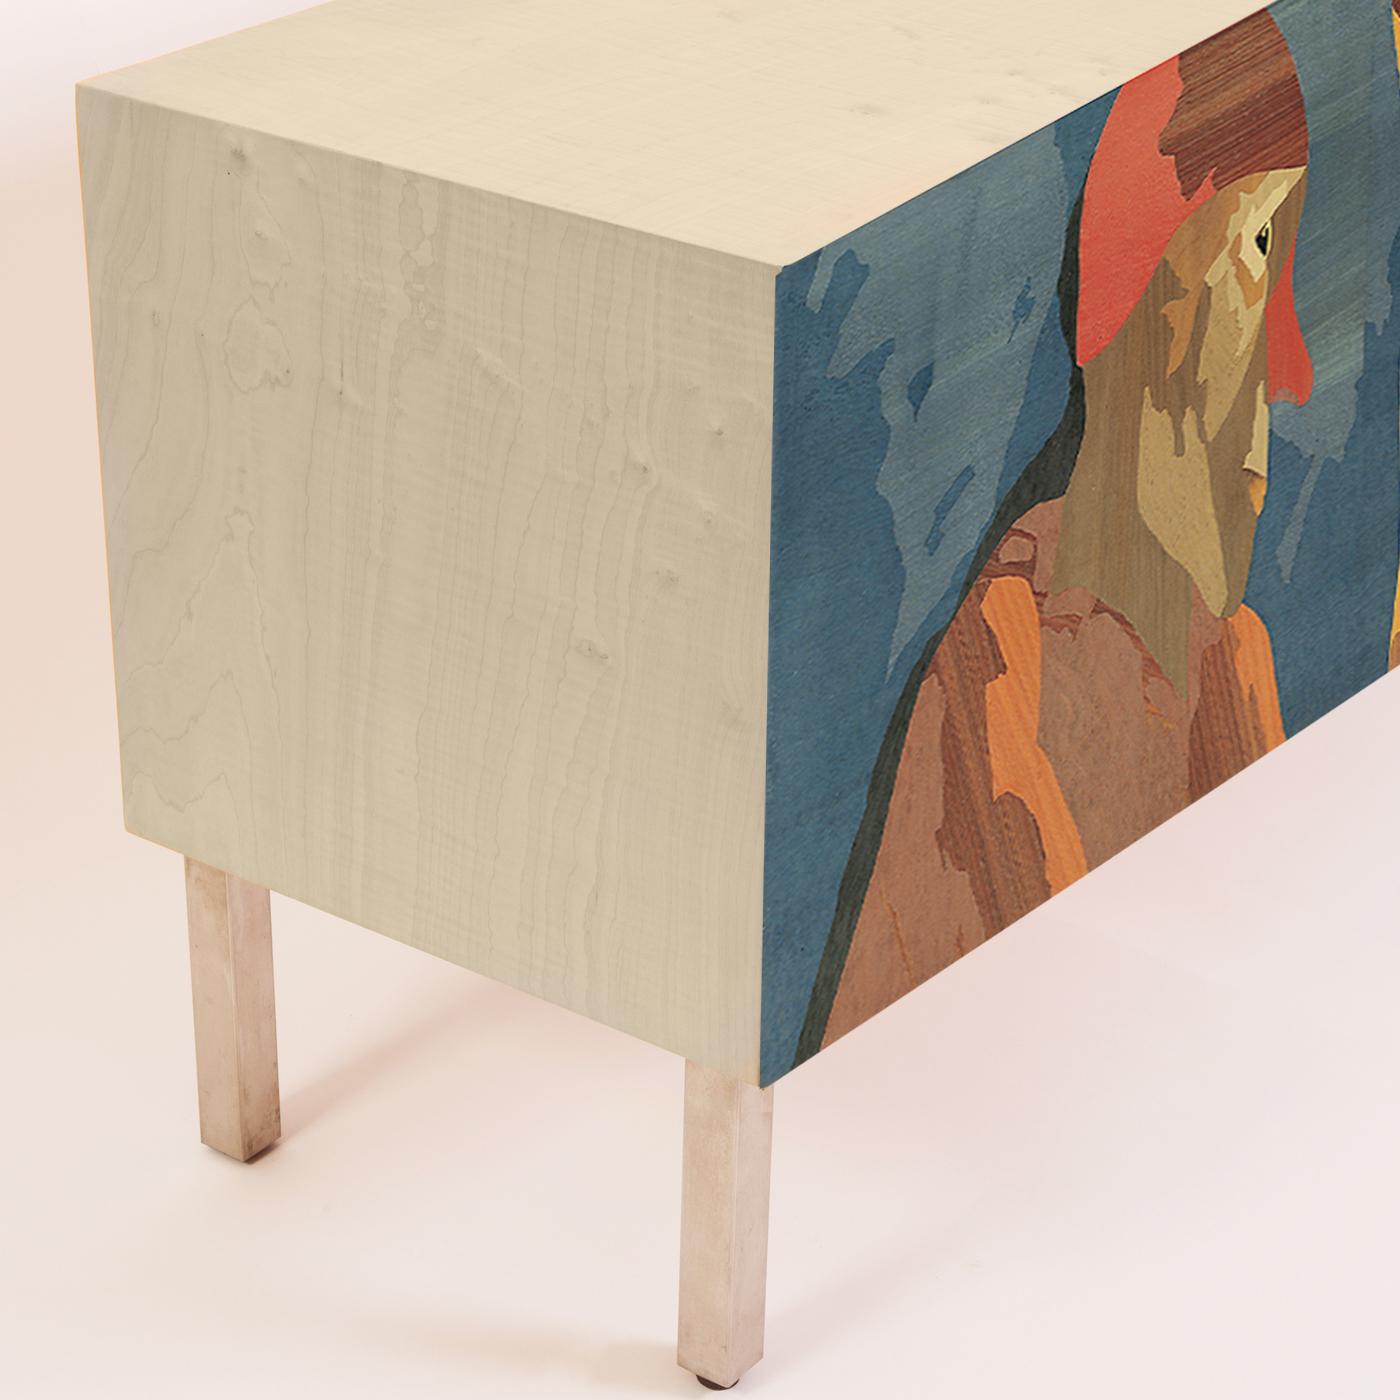 A dream-like composition designed by eminent Milanese poet and artist Emilio Tadini transforms this sideboard into veritable art. The cabinet features a multi-ply poplar wood structure covered in natural maple wood veneer. When open the sideboard